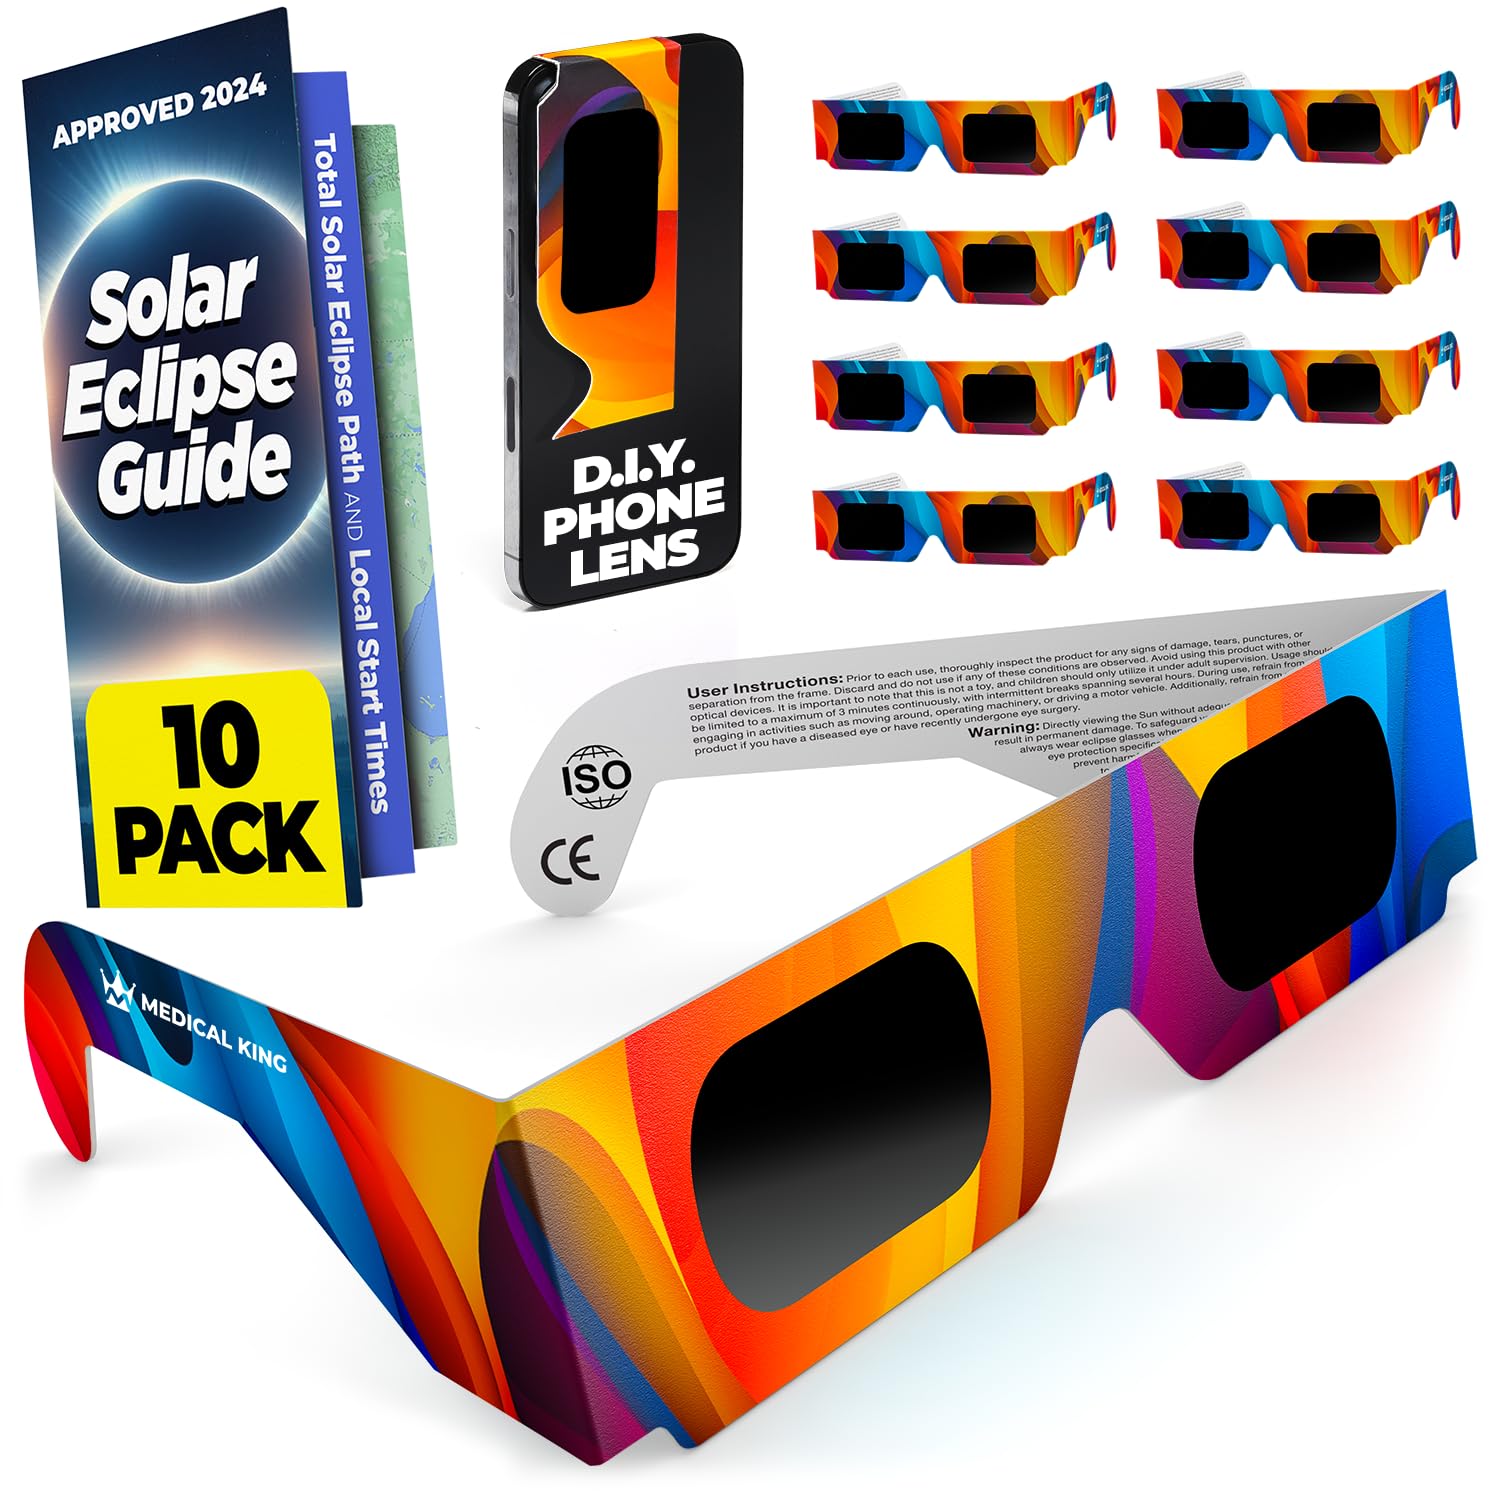 Limited-time deal: Medical king Solar Eclipse Glasses AAS Approved 2024 (10 Pack) CE and ISO Certified Safe Shades for Direct Sun Viewing - $6.99